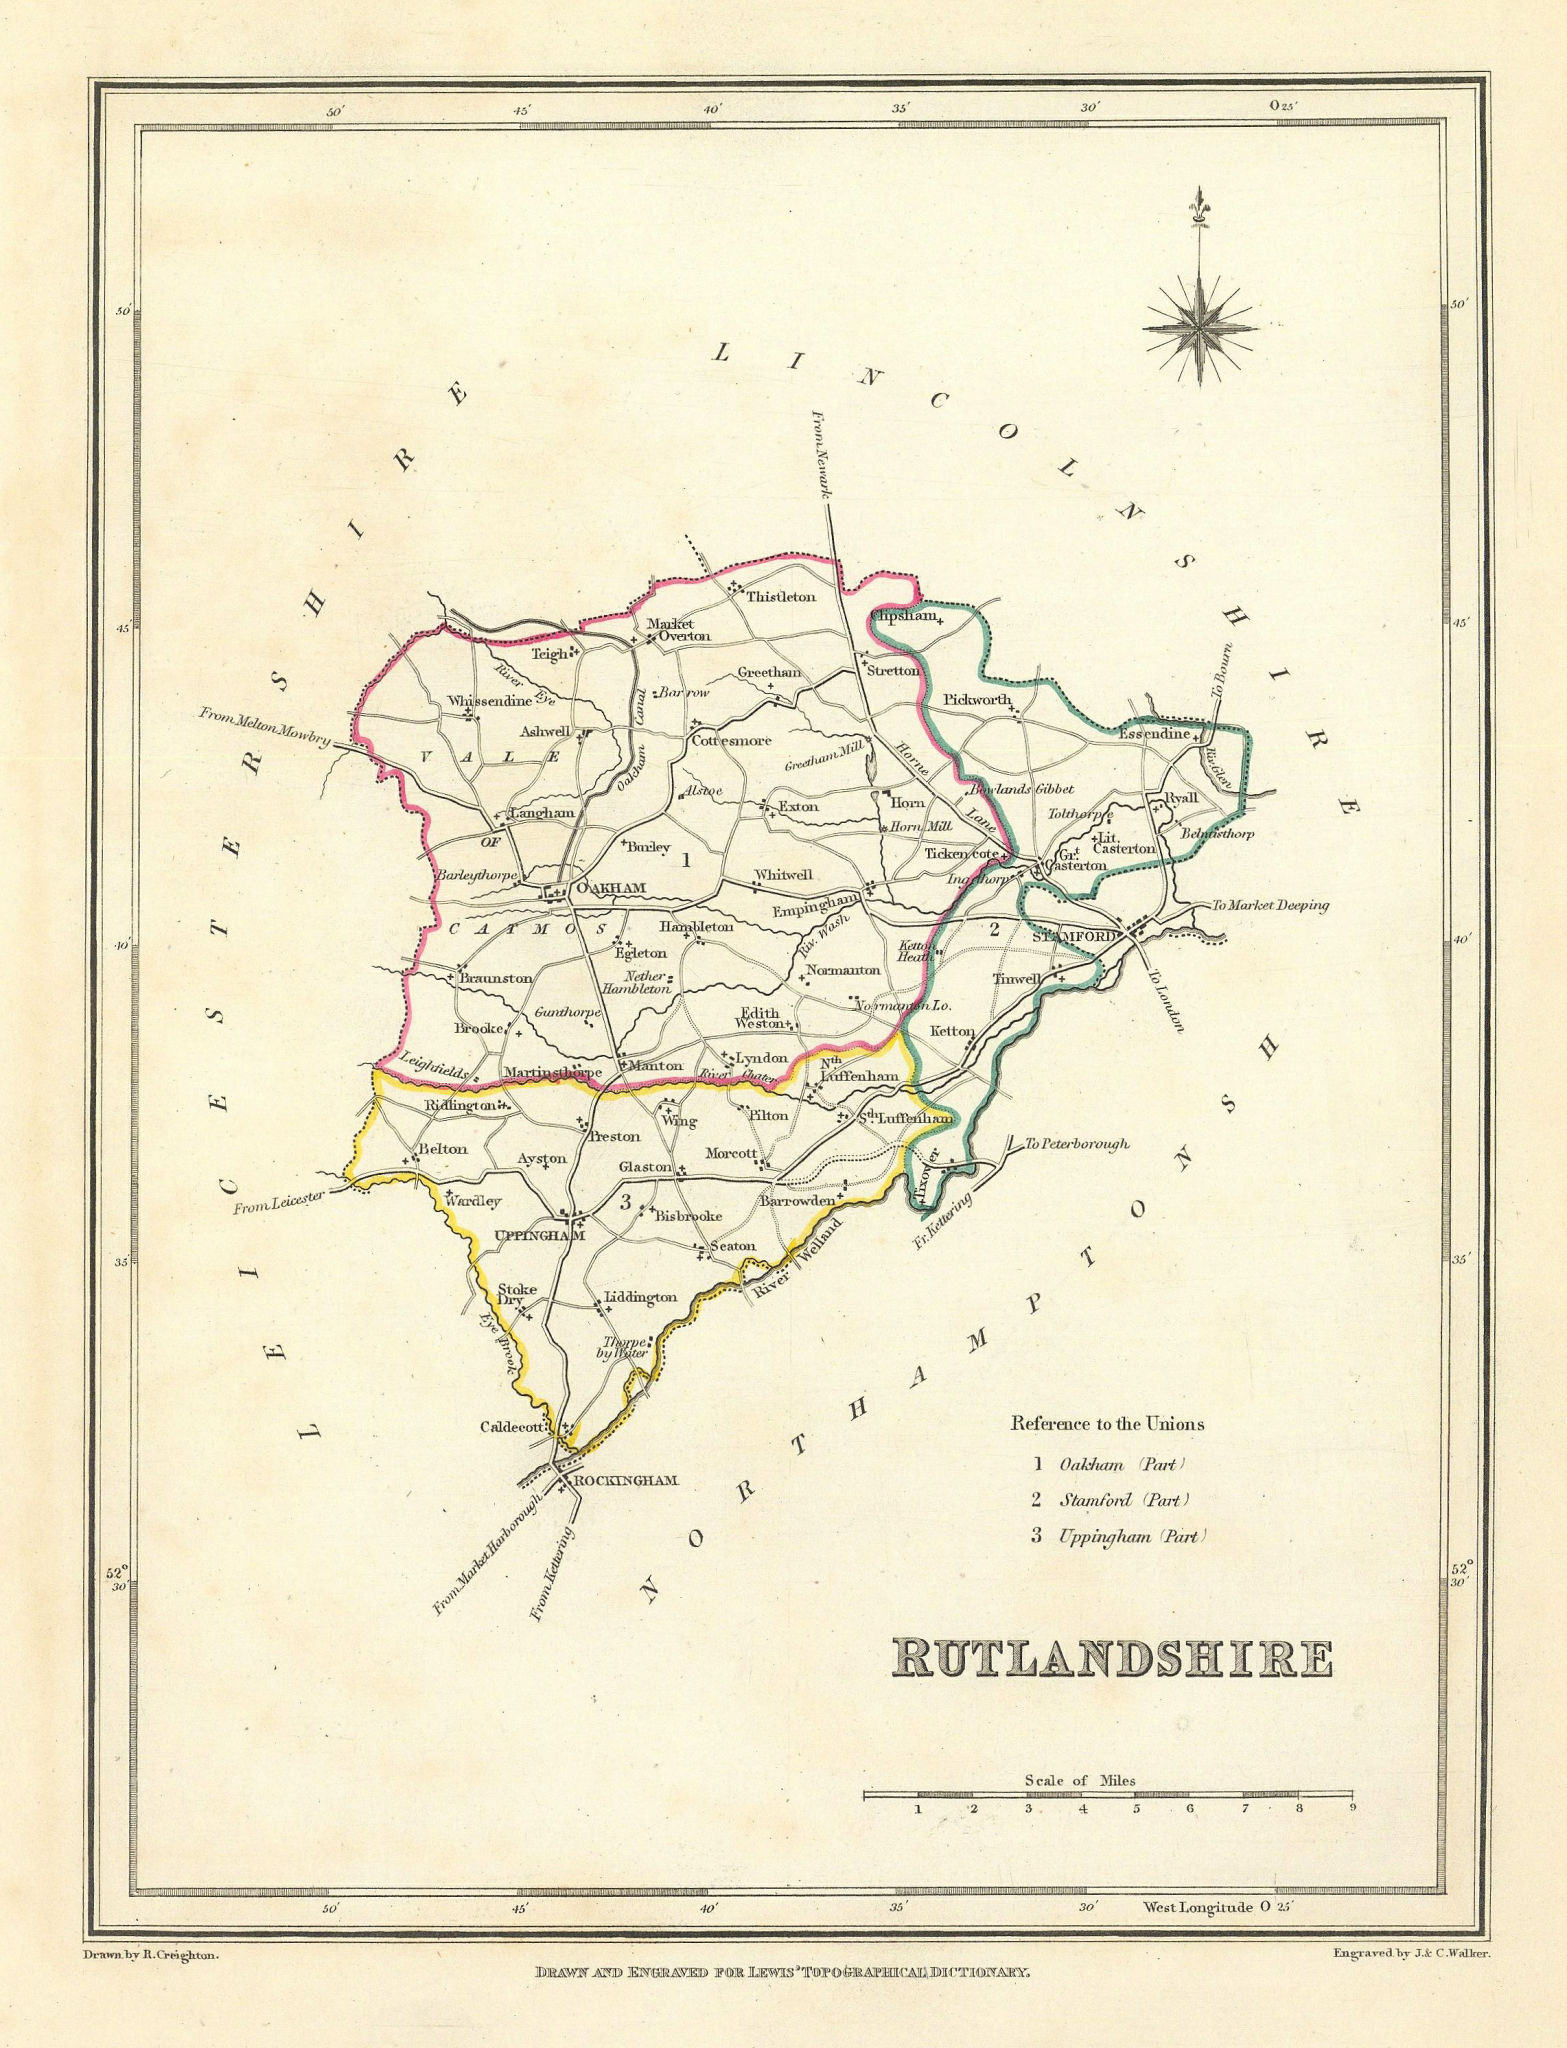 Associate Product Antique county map of RUTLANDSHIRE by Creighton & Walker for Lewis c1840